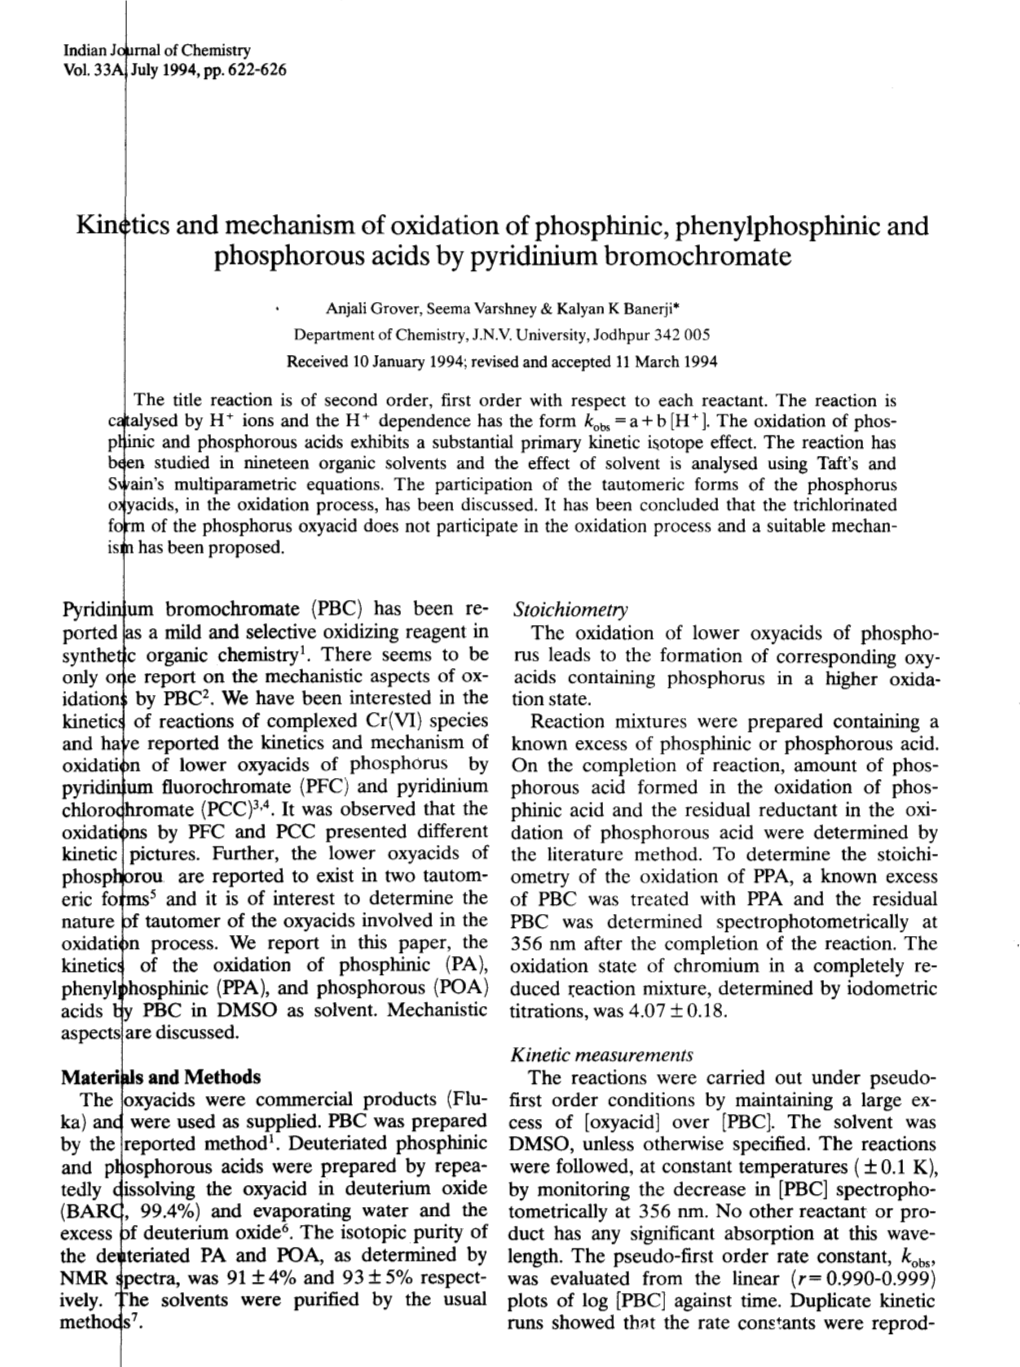 Kin~Tics and Mechanism of Oxidation of Phosphinic, Phenylphosphinic and Phosphorous Acids by Pyridinium Bromochromate